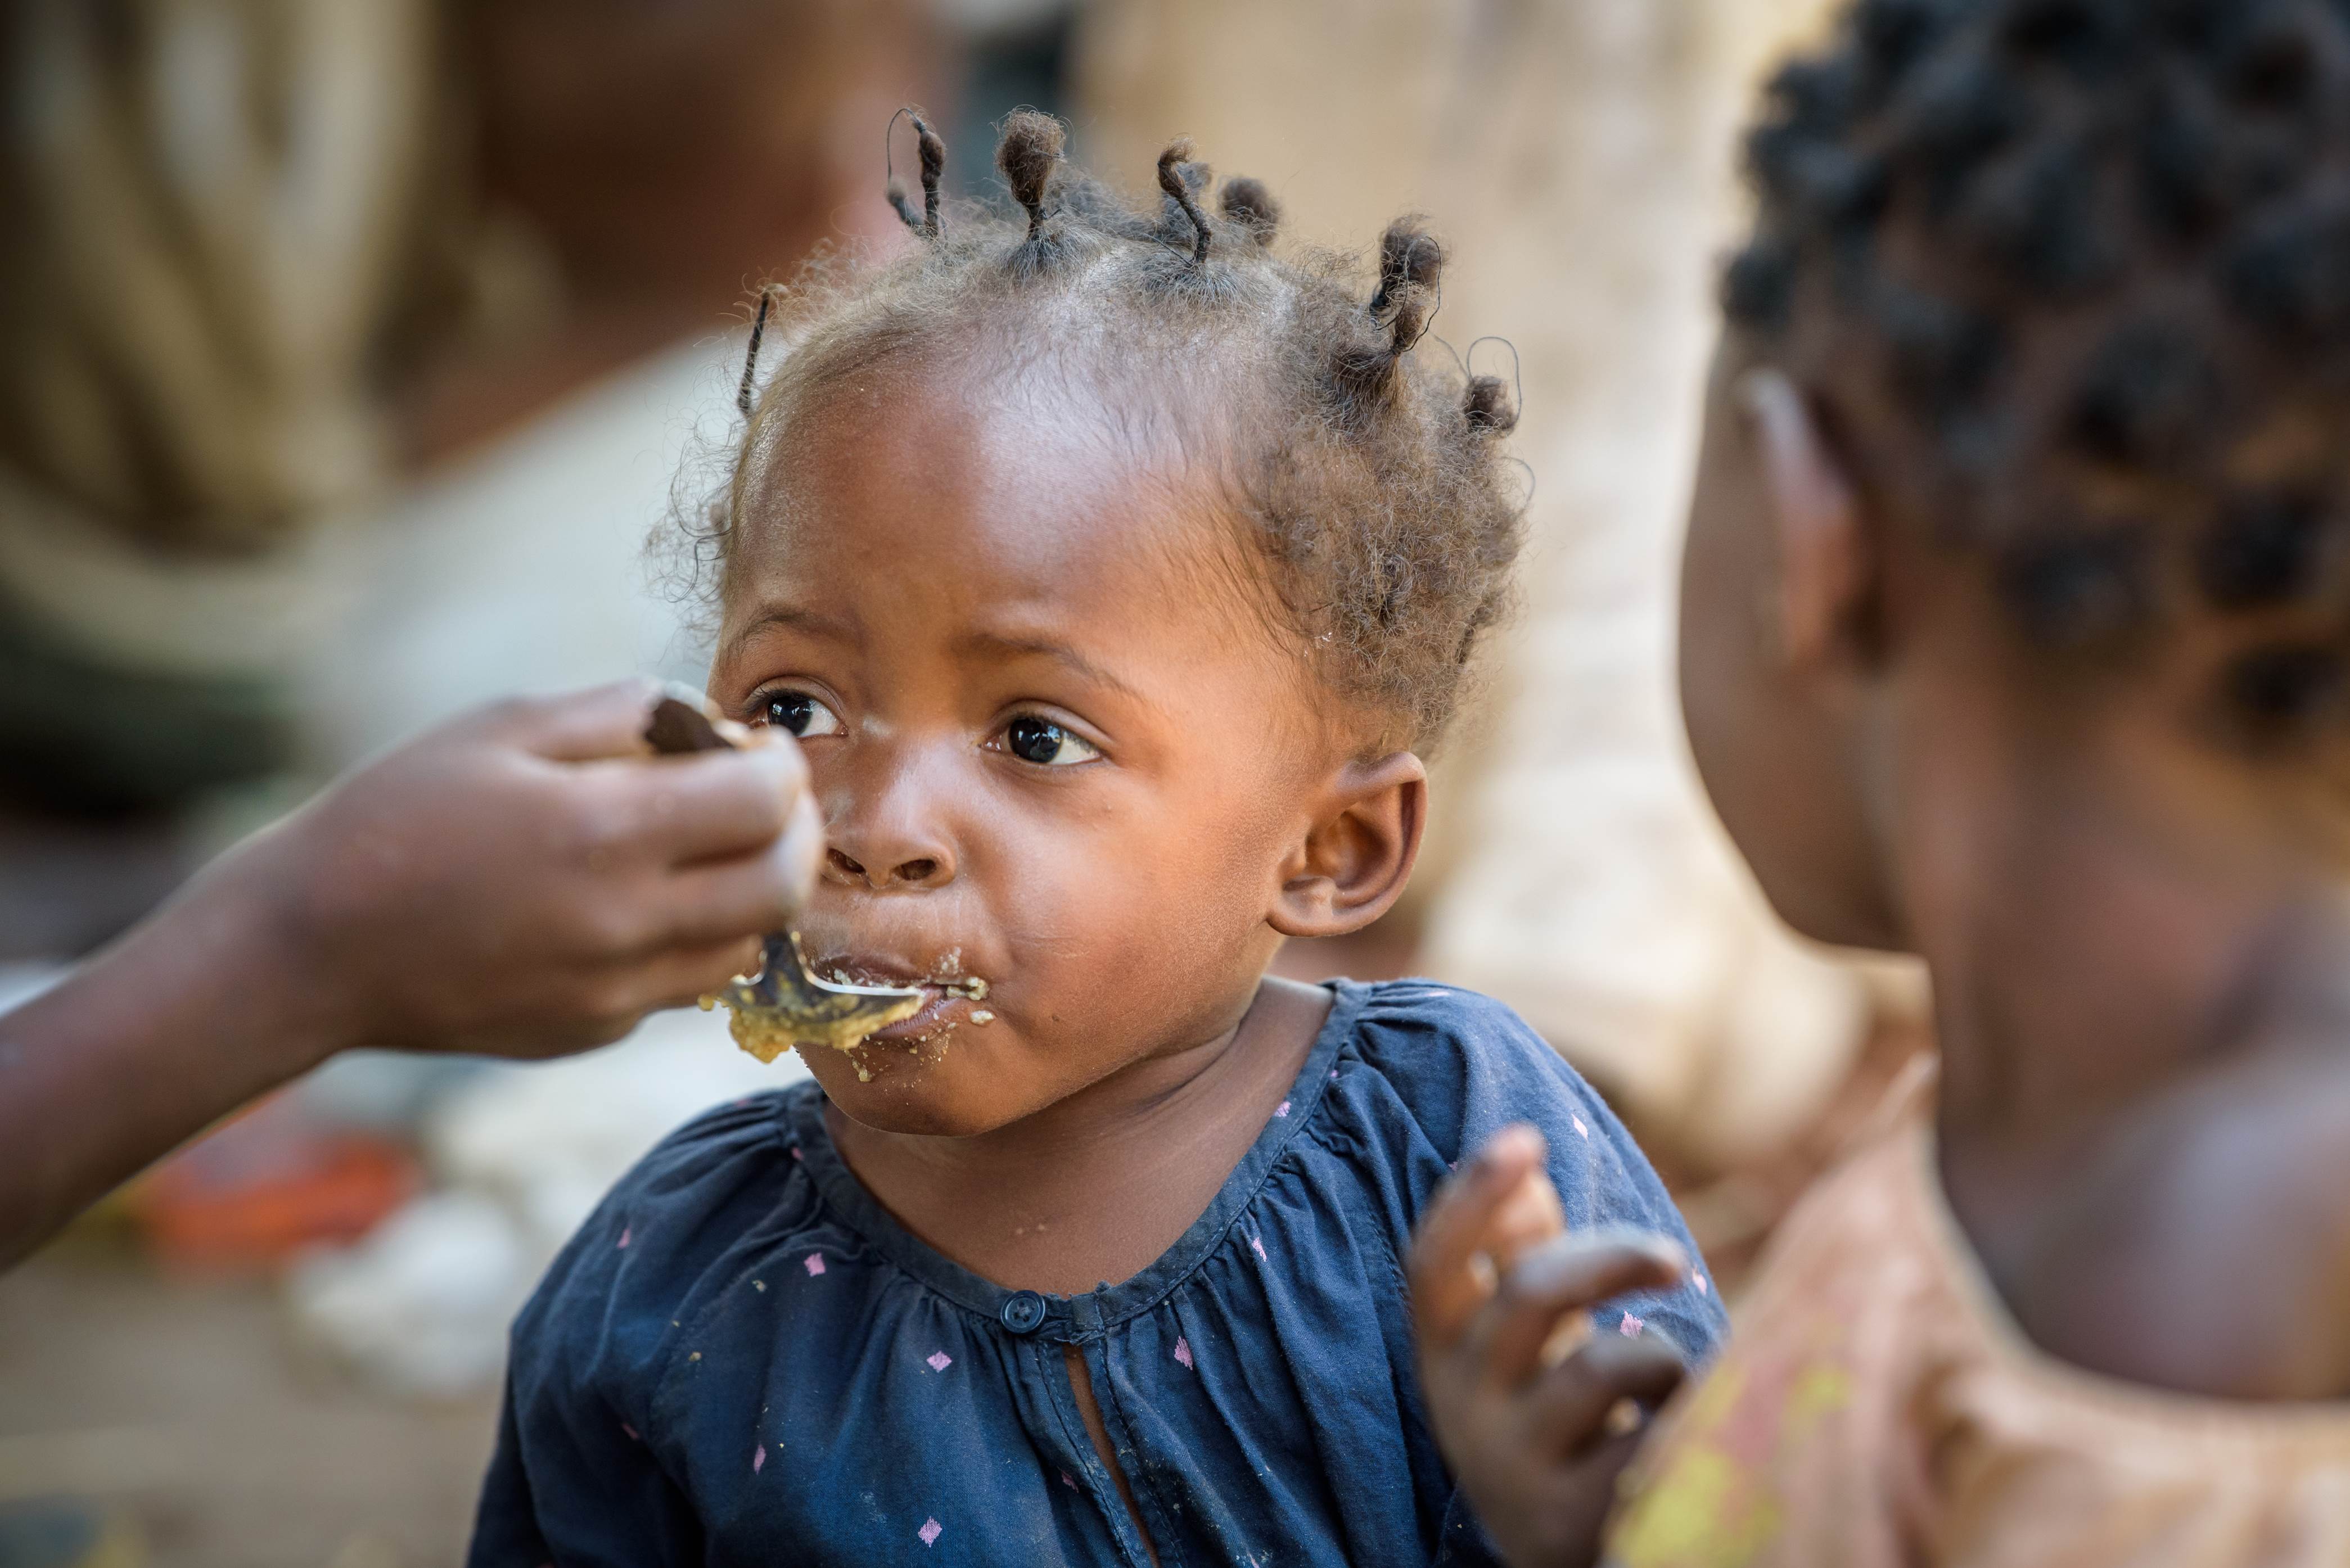 Young girl from the DRC being fed with a spoon by another child (not in frame)